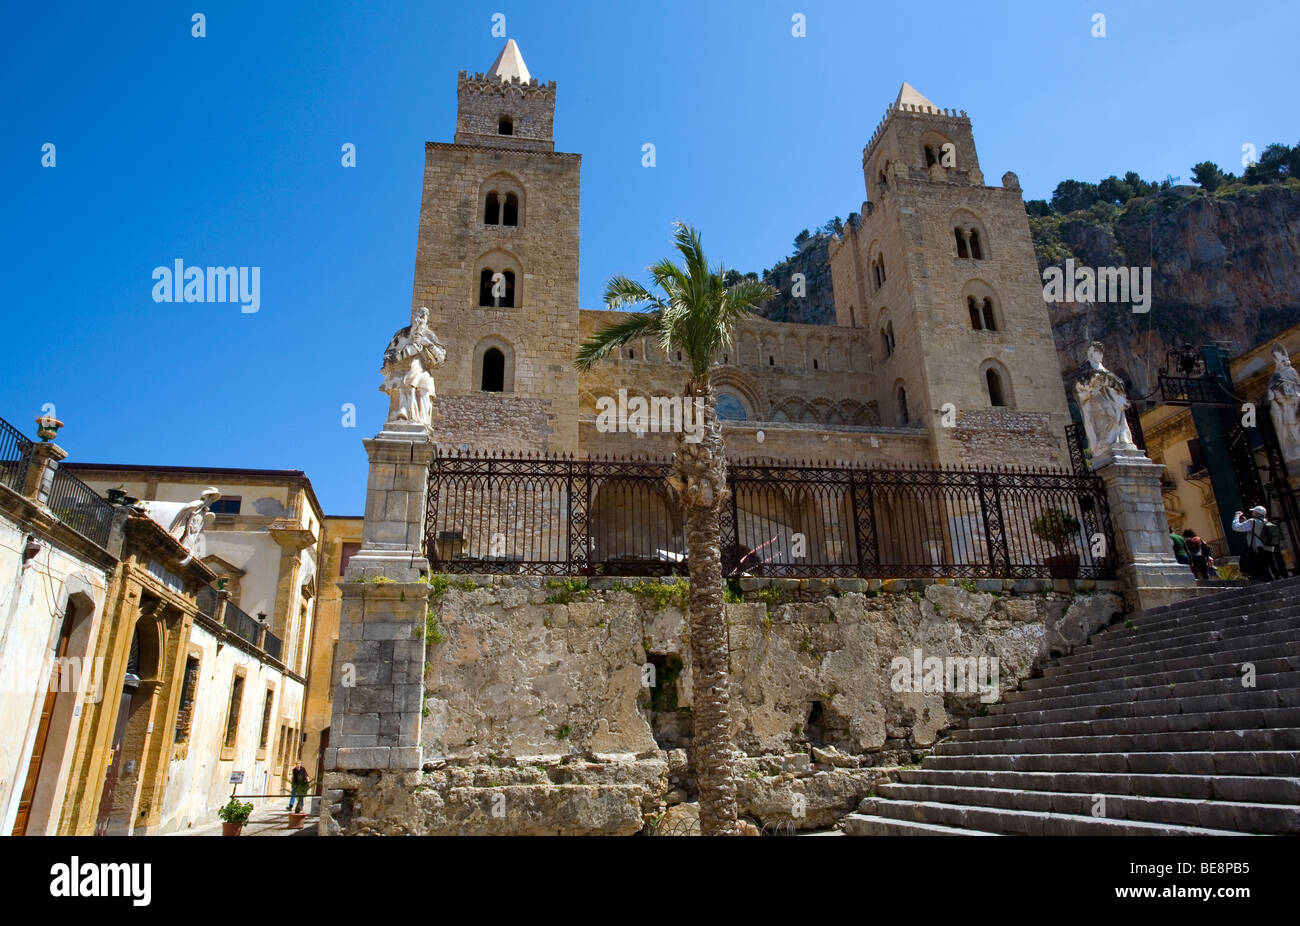 Full view of the Duomo (Cathedral) in the town of Cefalu on the Island of Sicily, Italy Stock Photo